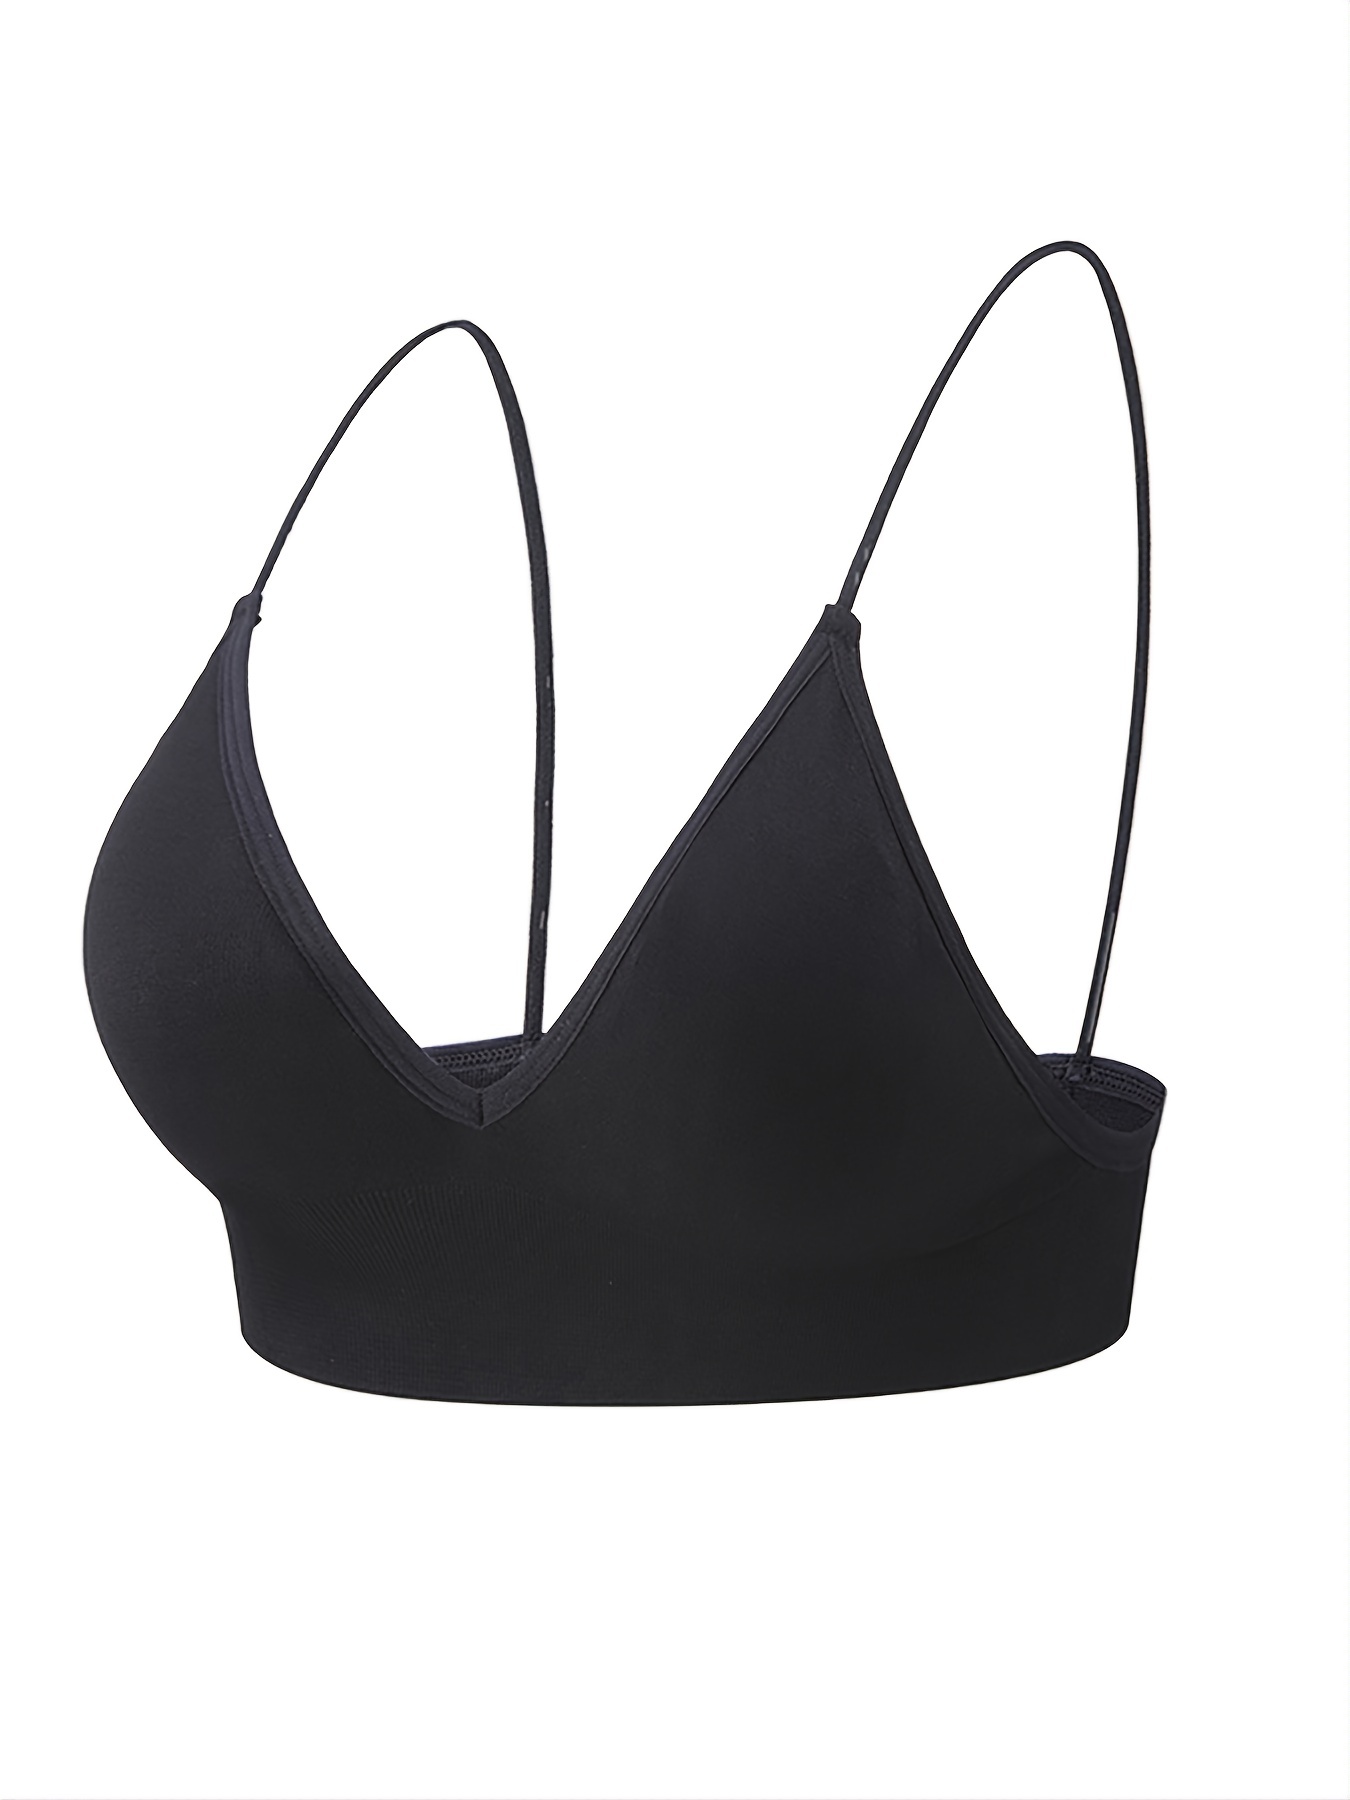 Black Padded Sports Bra Triangle Bralette for Wome Ribbed Cross Beauty Back  Womens Bras Push up No Underwire (Black, S) at  Women's Clothing store